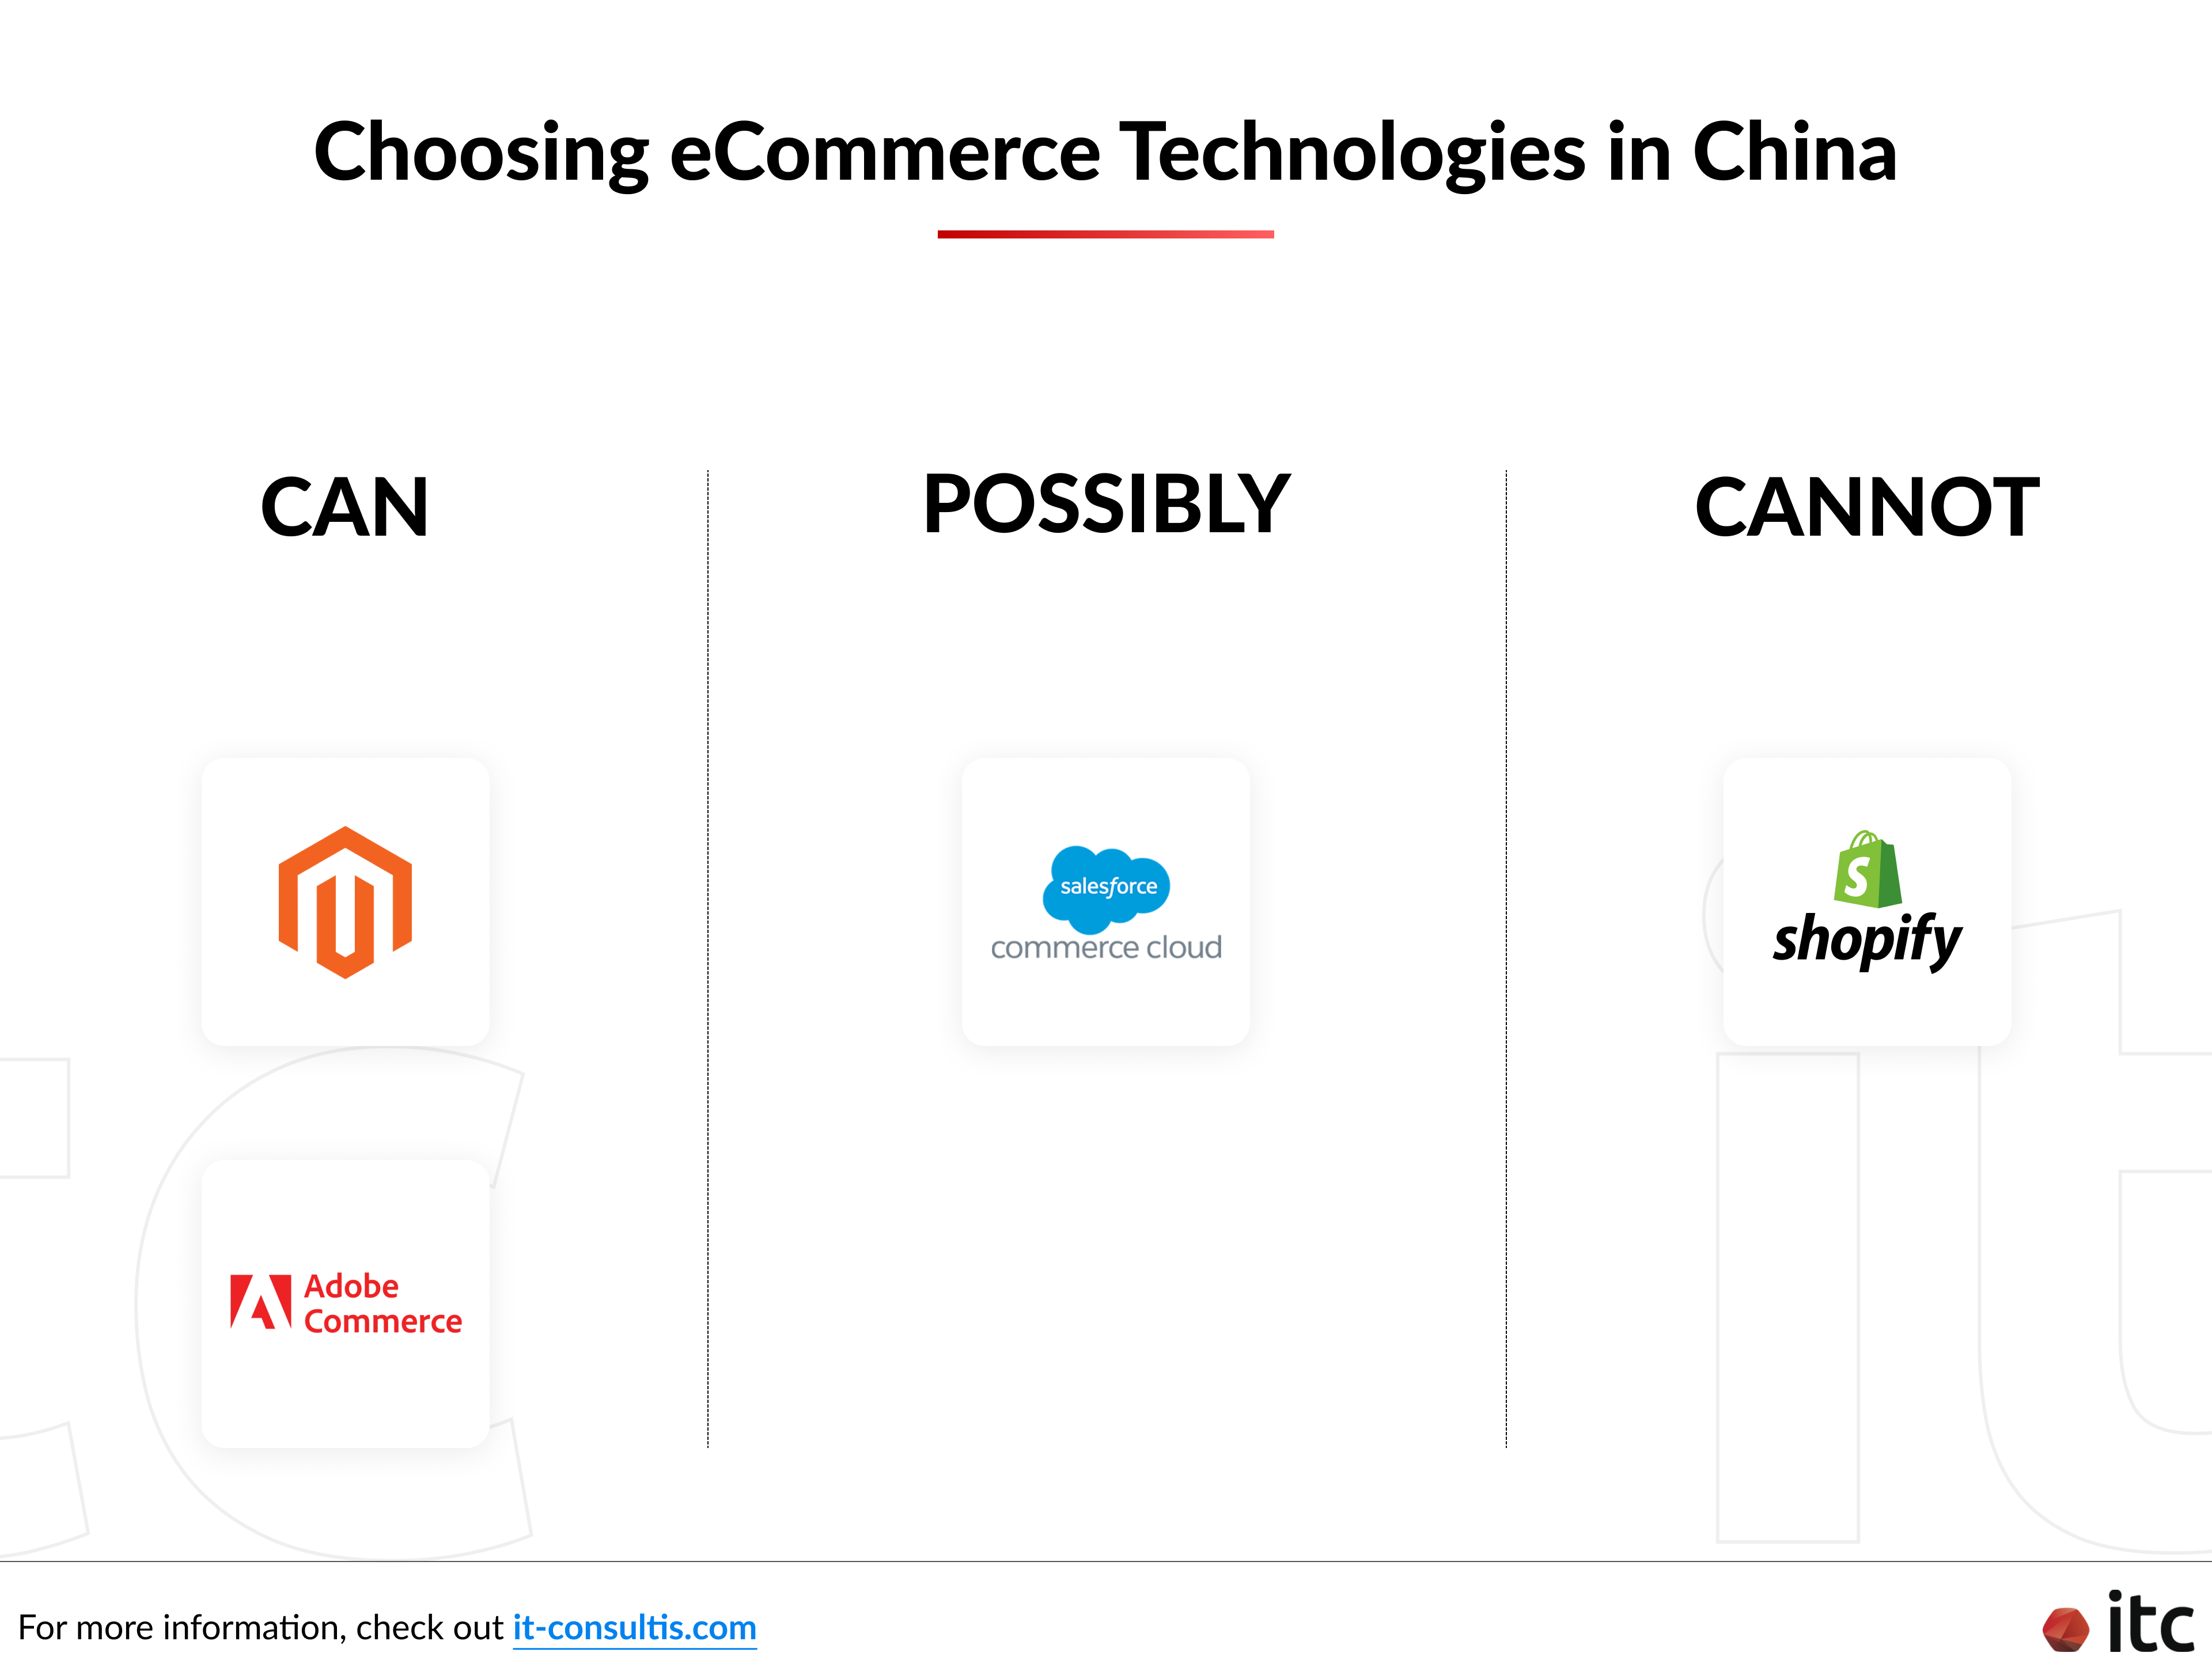 What to know about eCommerce technologies in China: Magento and Adobe Commerce can work; Shopify doesn't; and Salesforce Commerce Cloud will possibly work soon